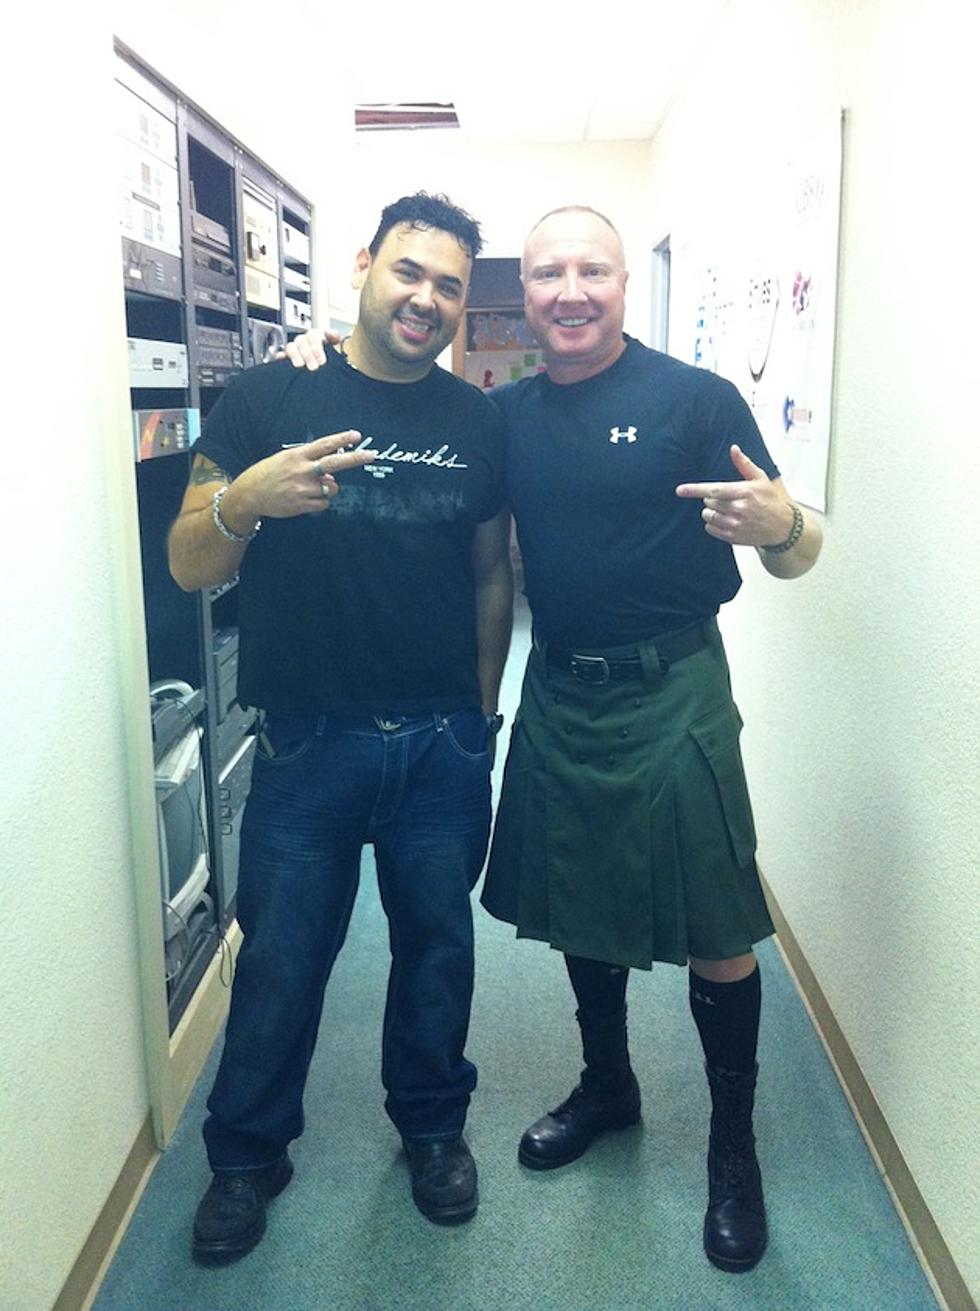 Designated Office ‘Fun Days’ Are Good For Morale – Today Was Kilt Day